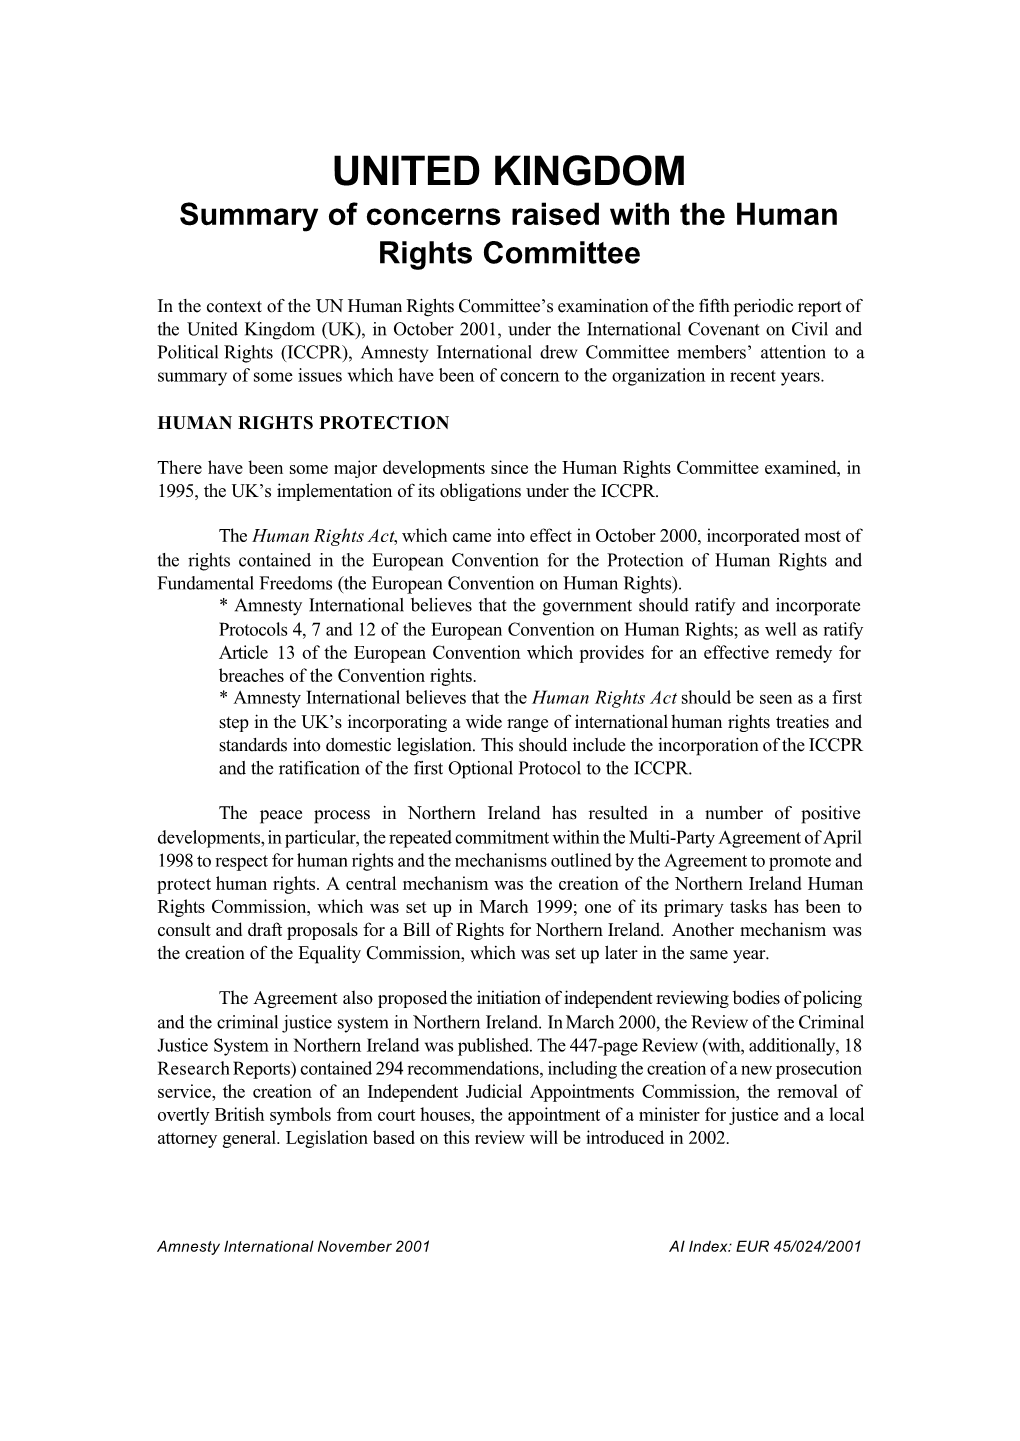 Summary of Concerns Raised with the Human Rights Committee